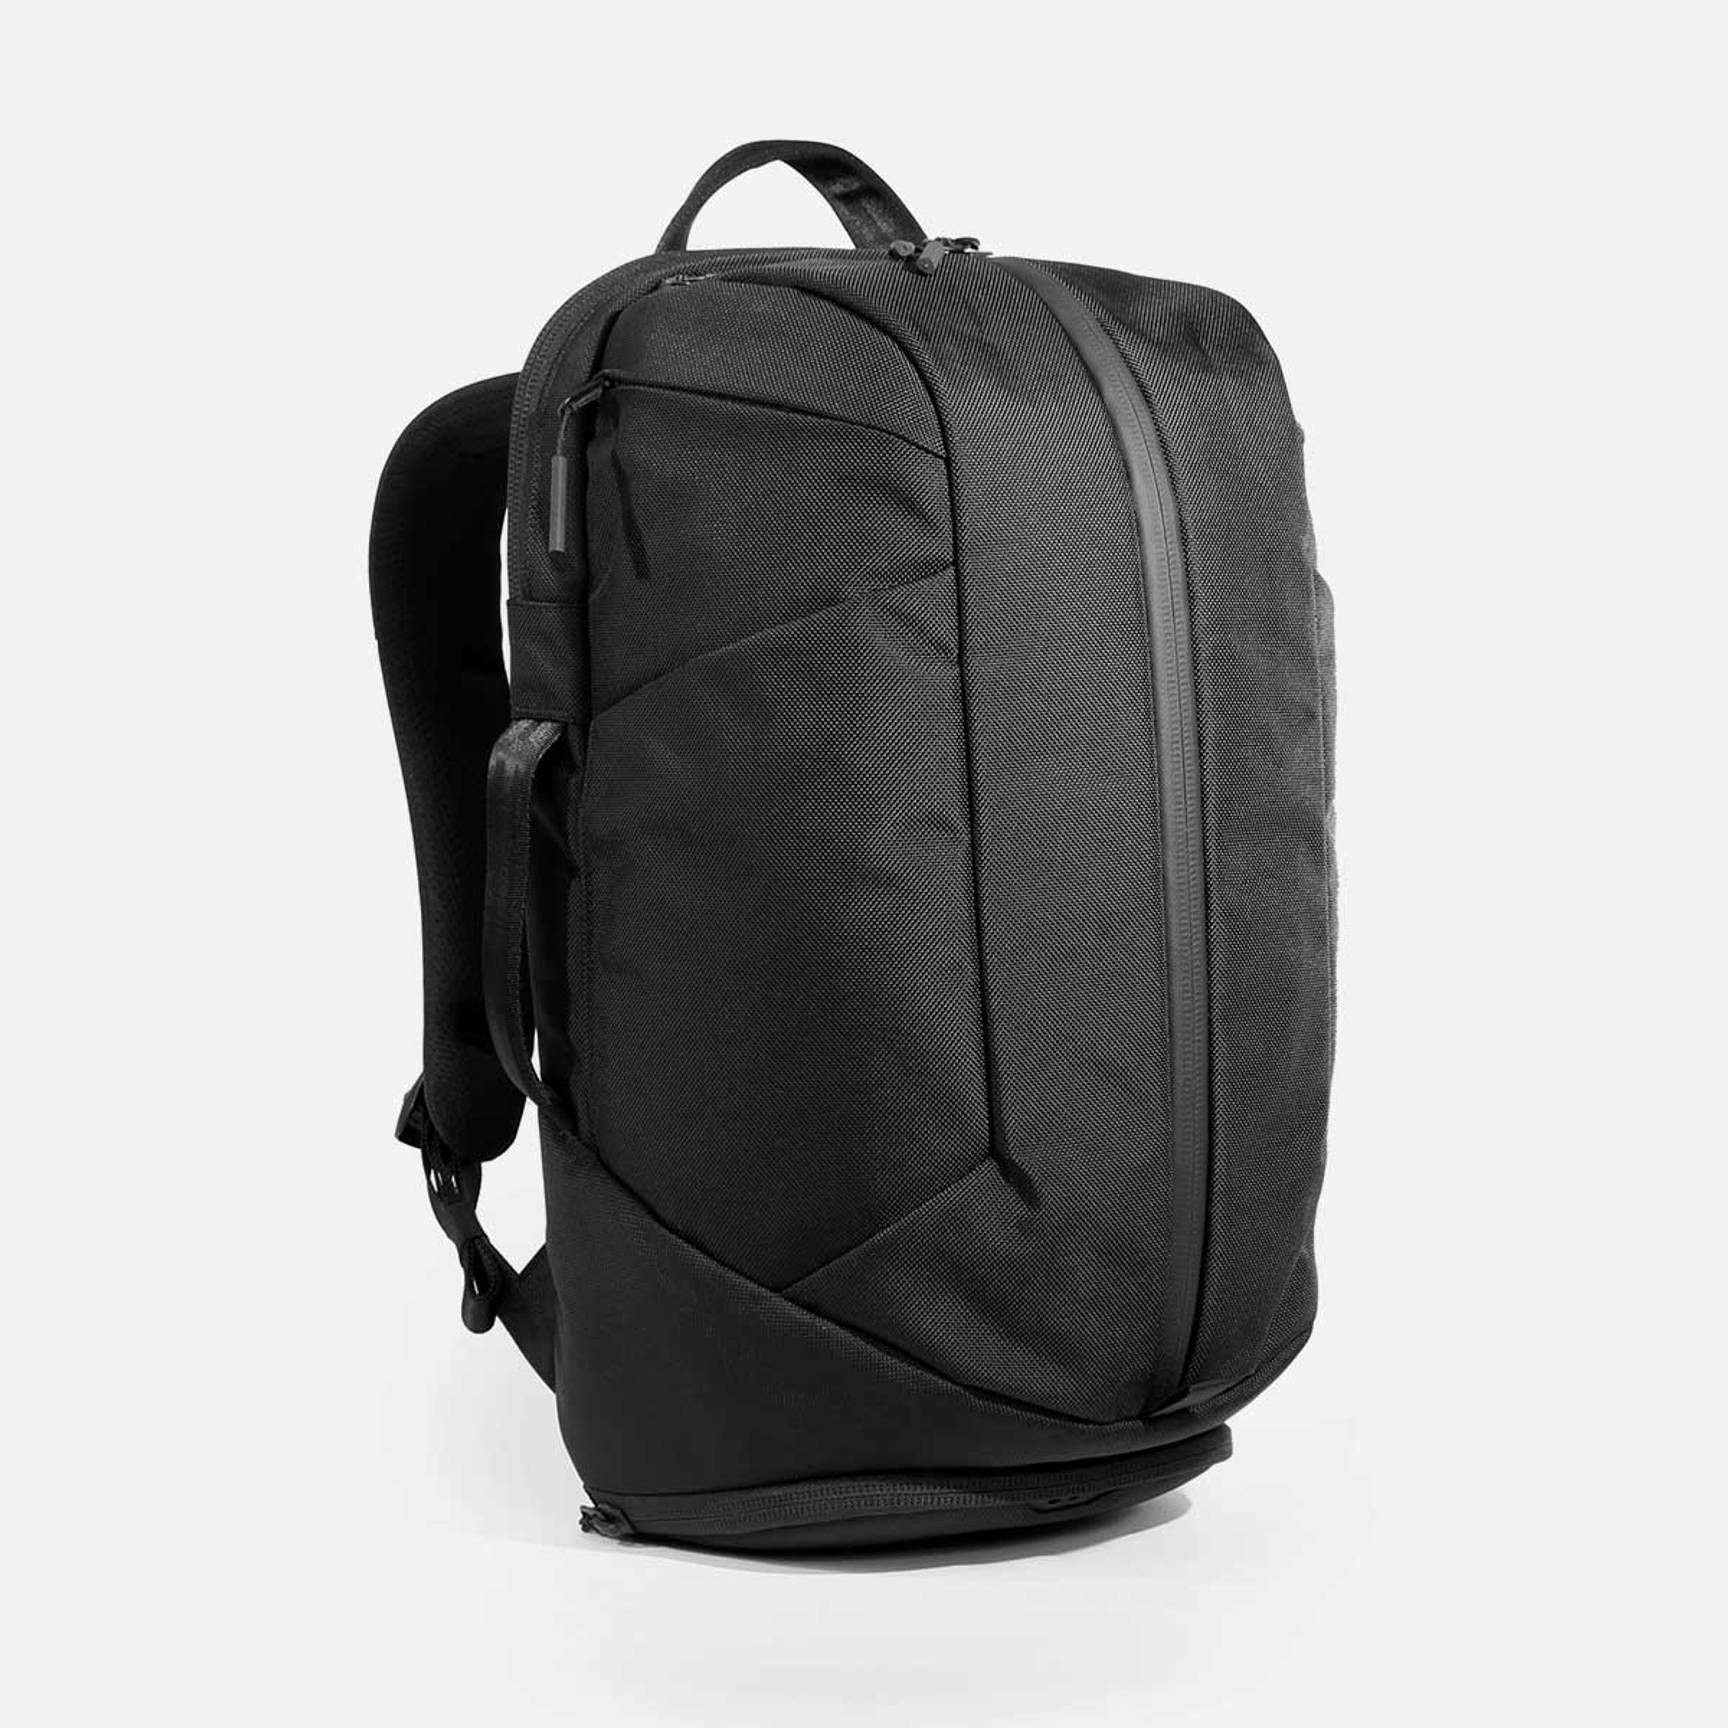 16 Best Gym Bags for Every Kind of Exerciser 2020